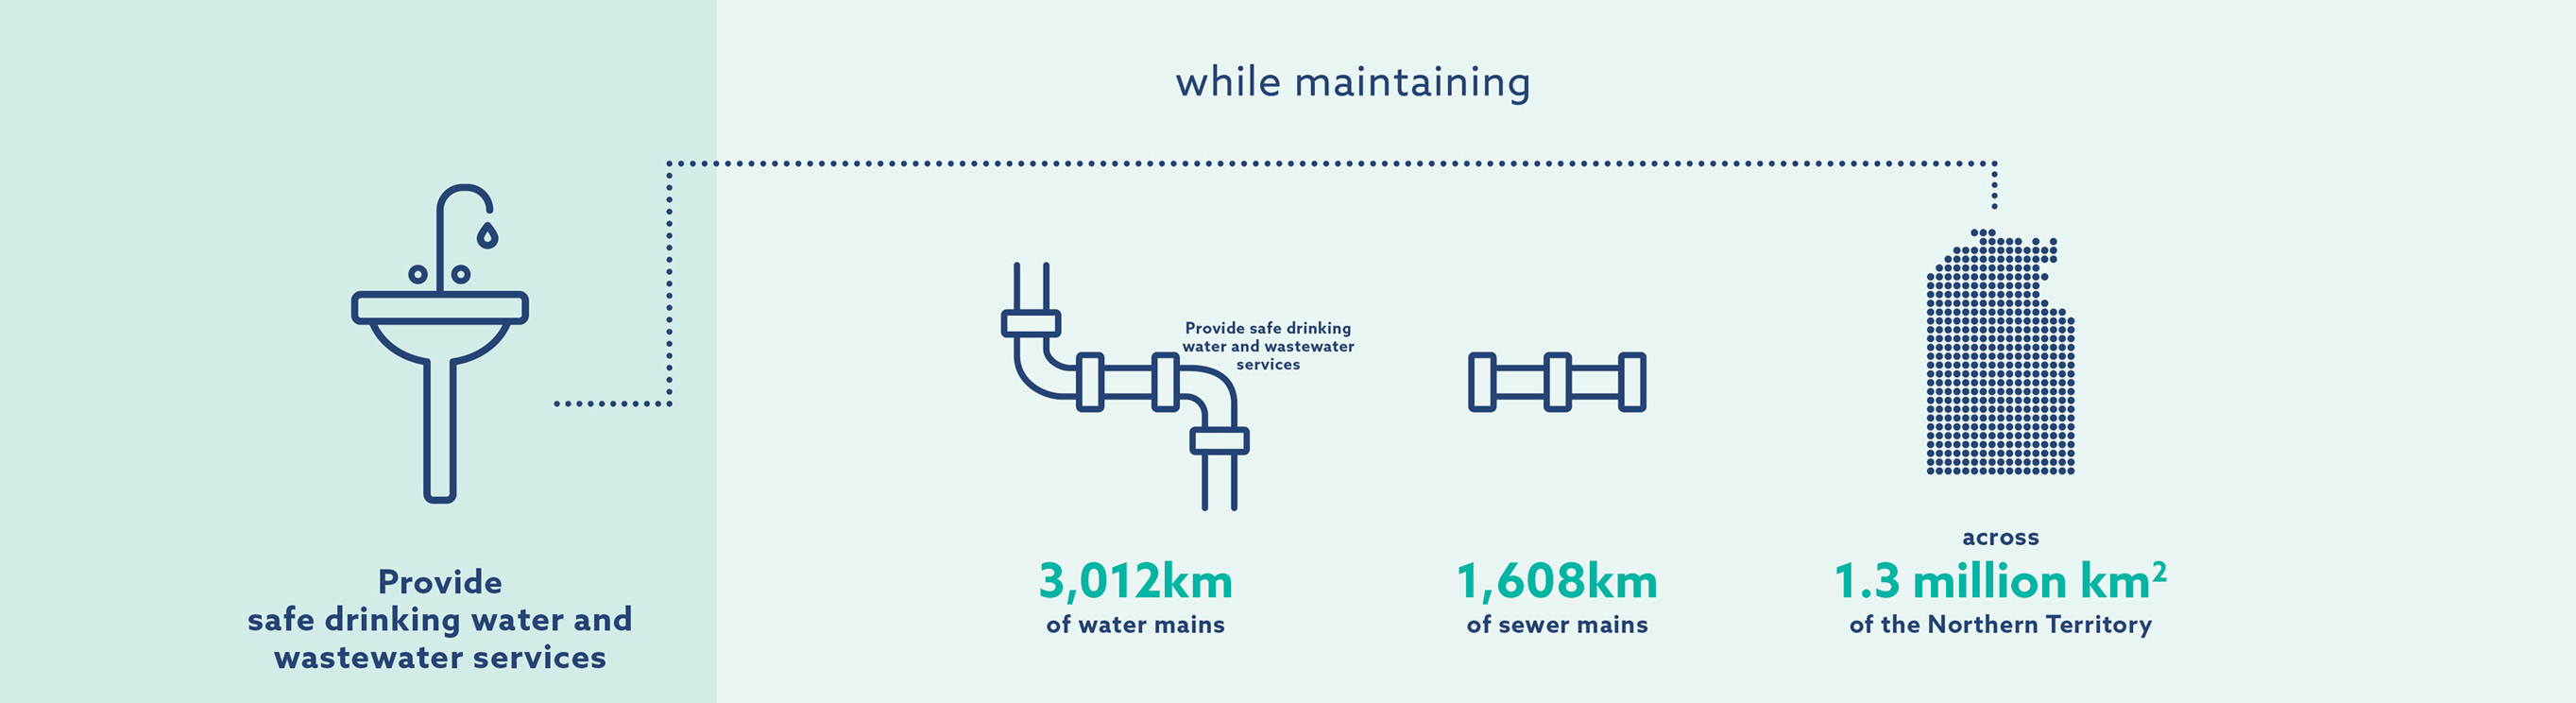 Power and Water's water, wastewater and sewerage services across the Northern Territory